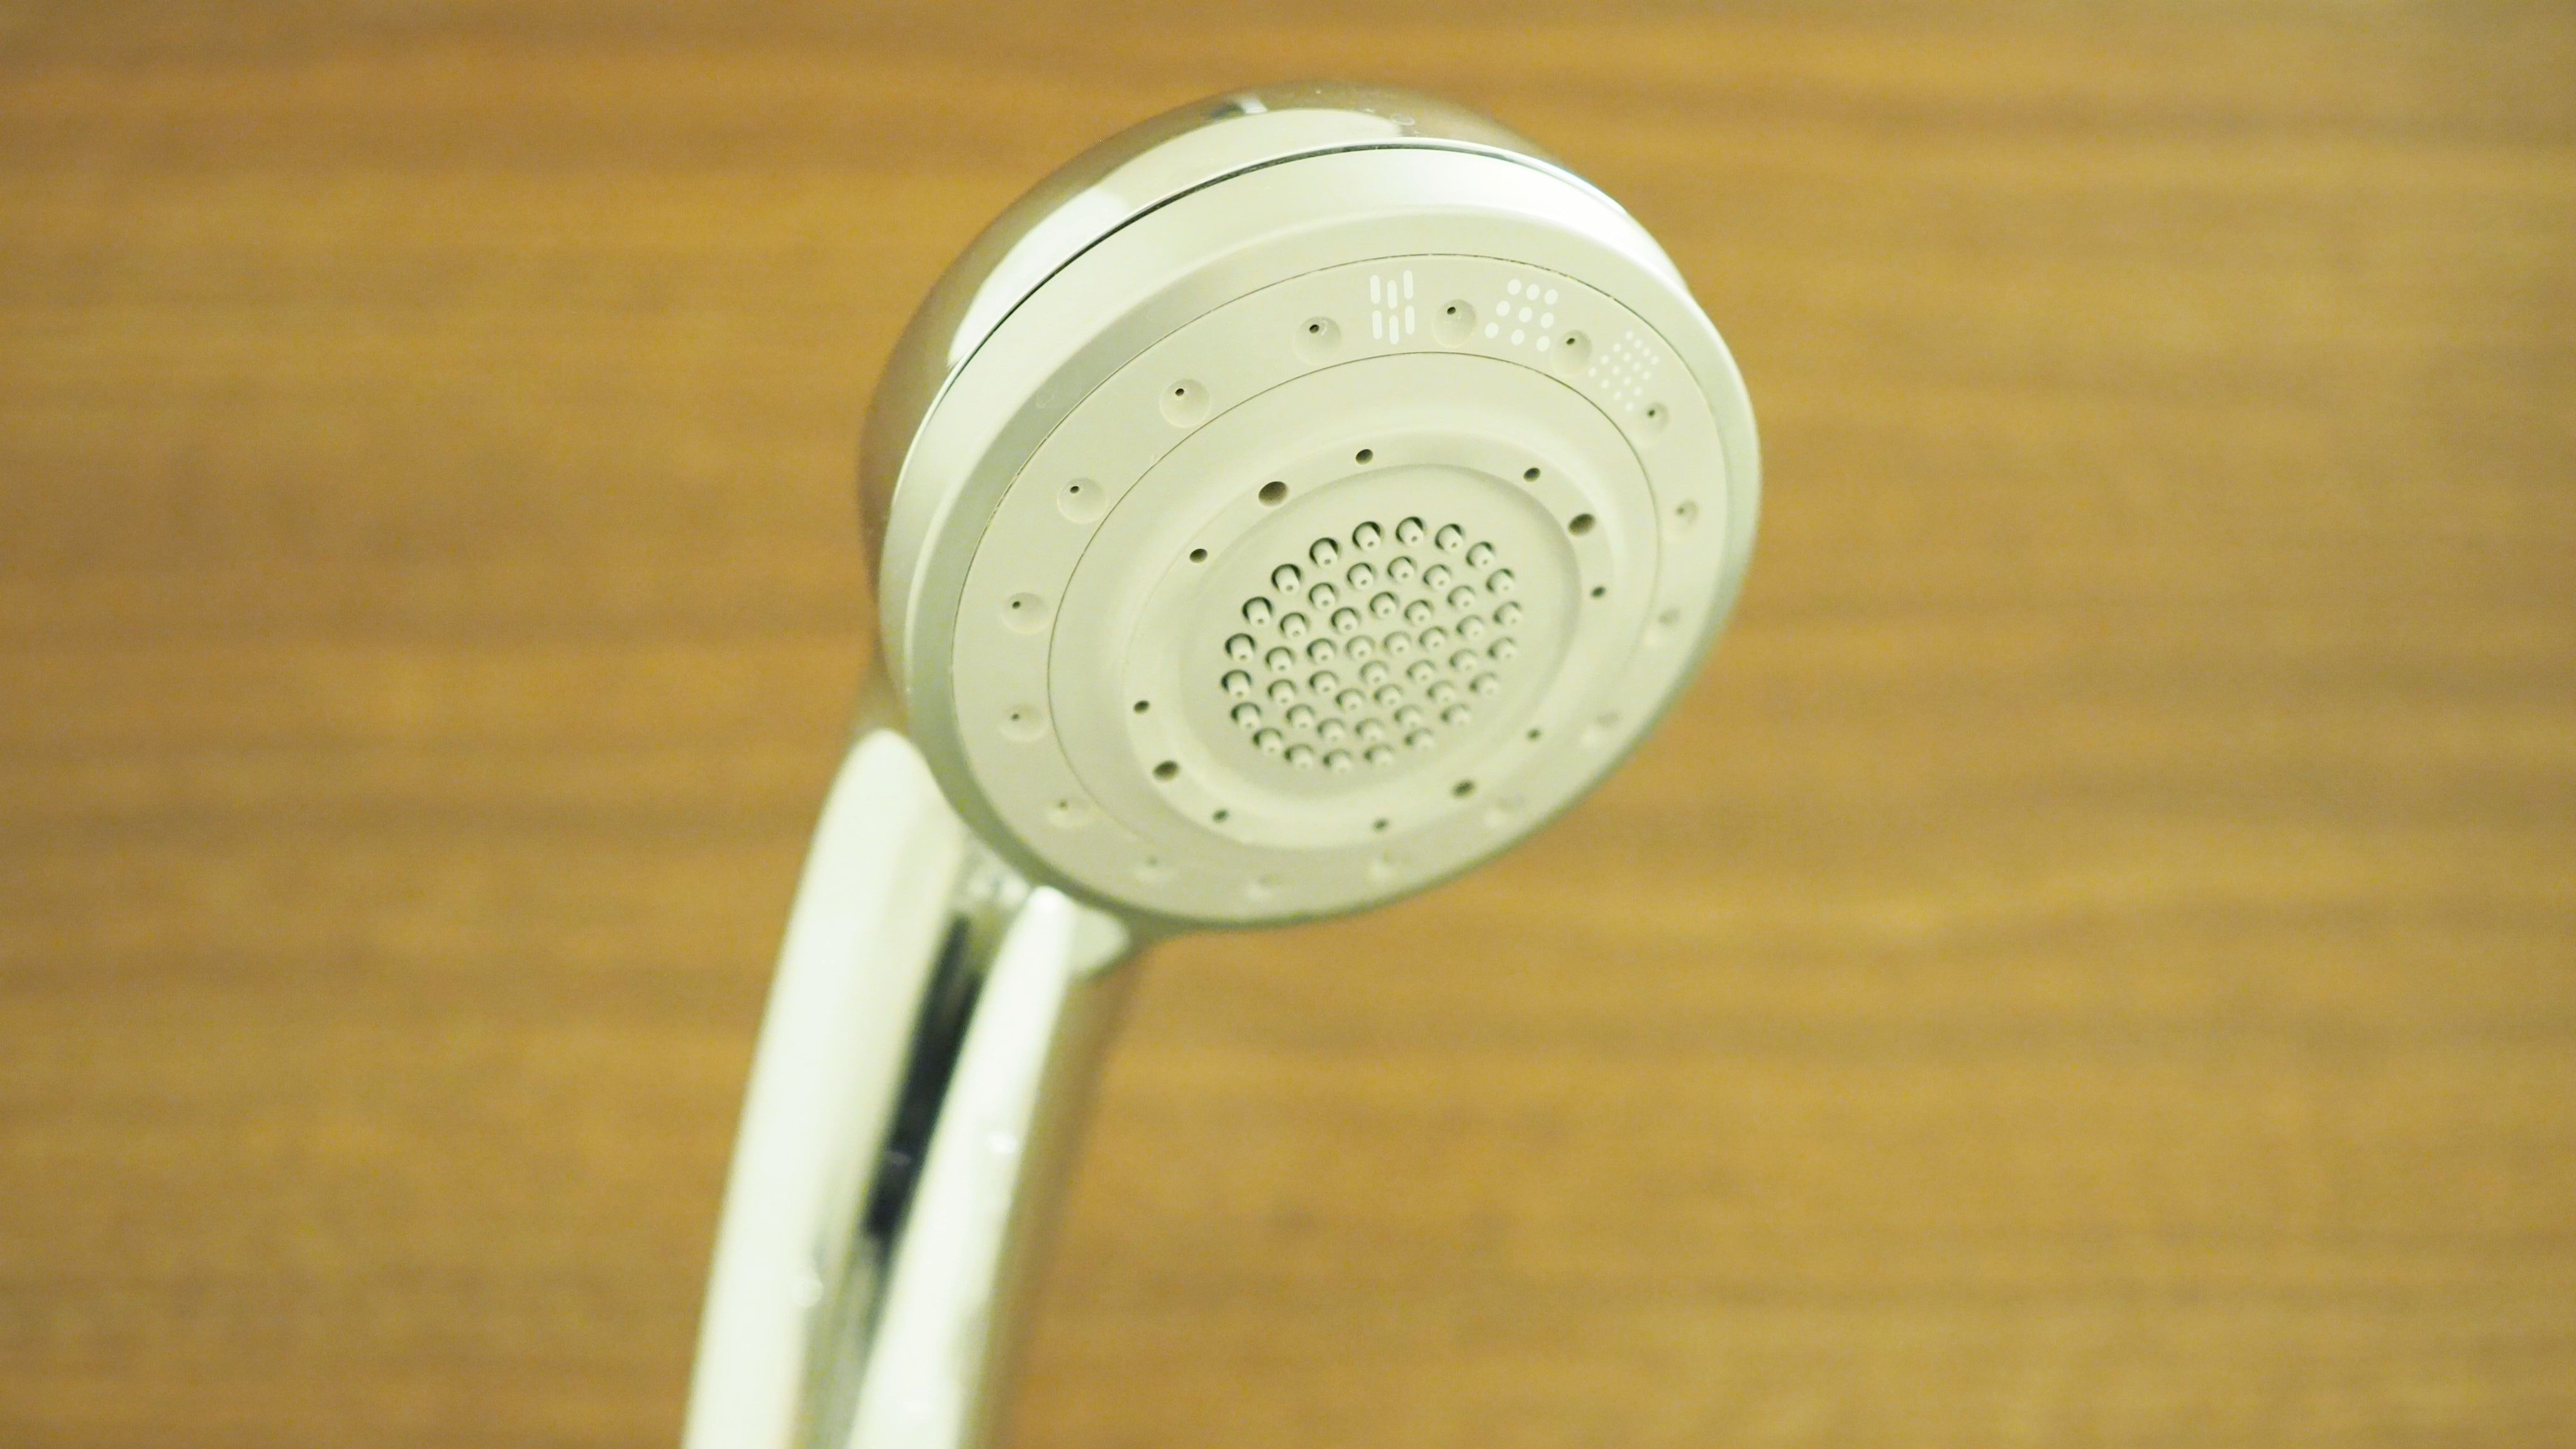 Shower head that can be switched in 3 stages